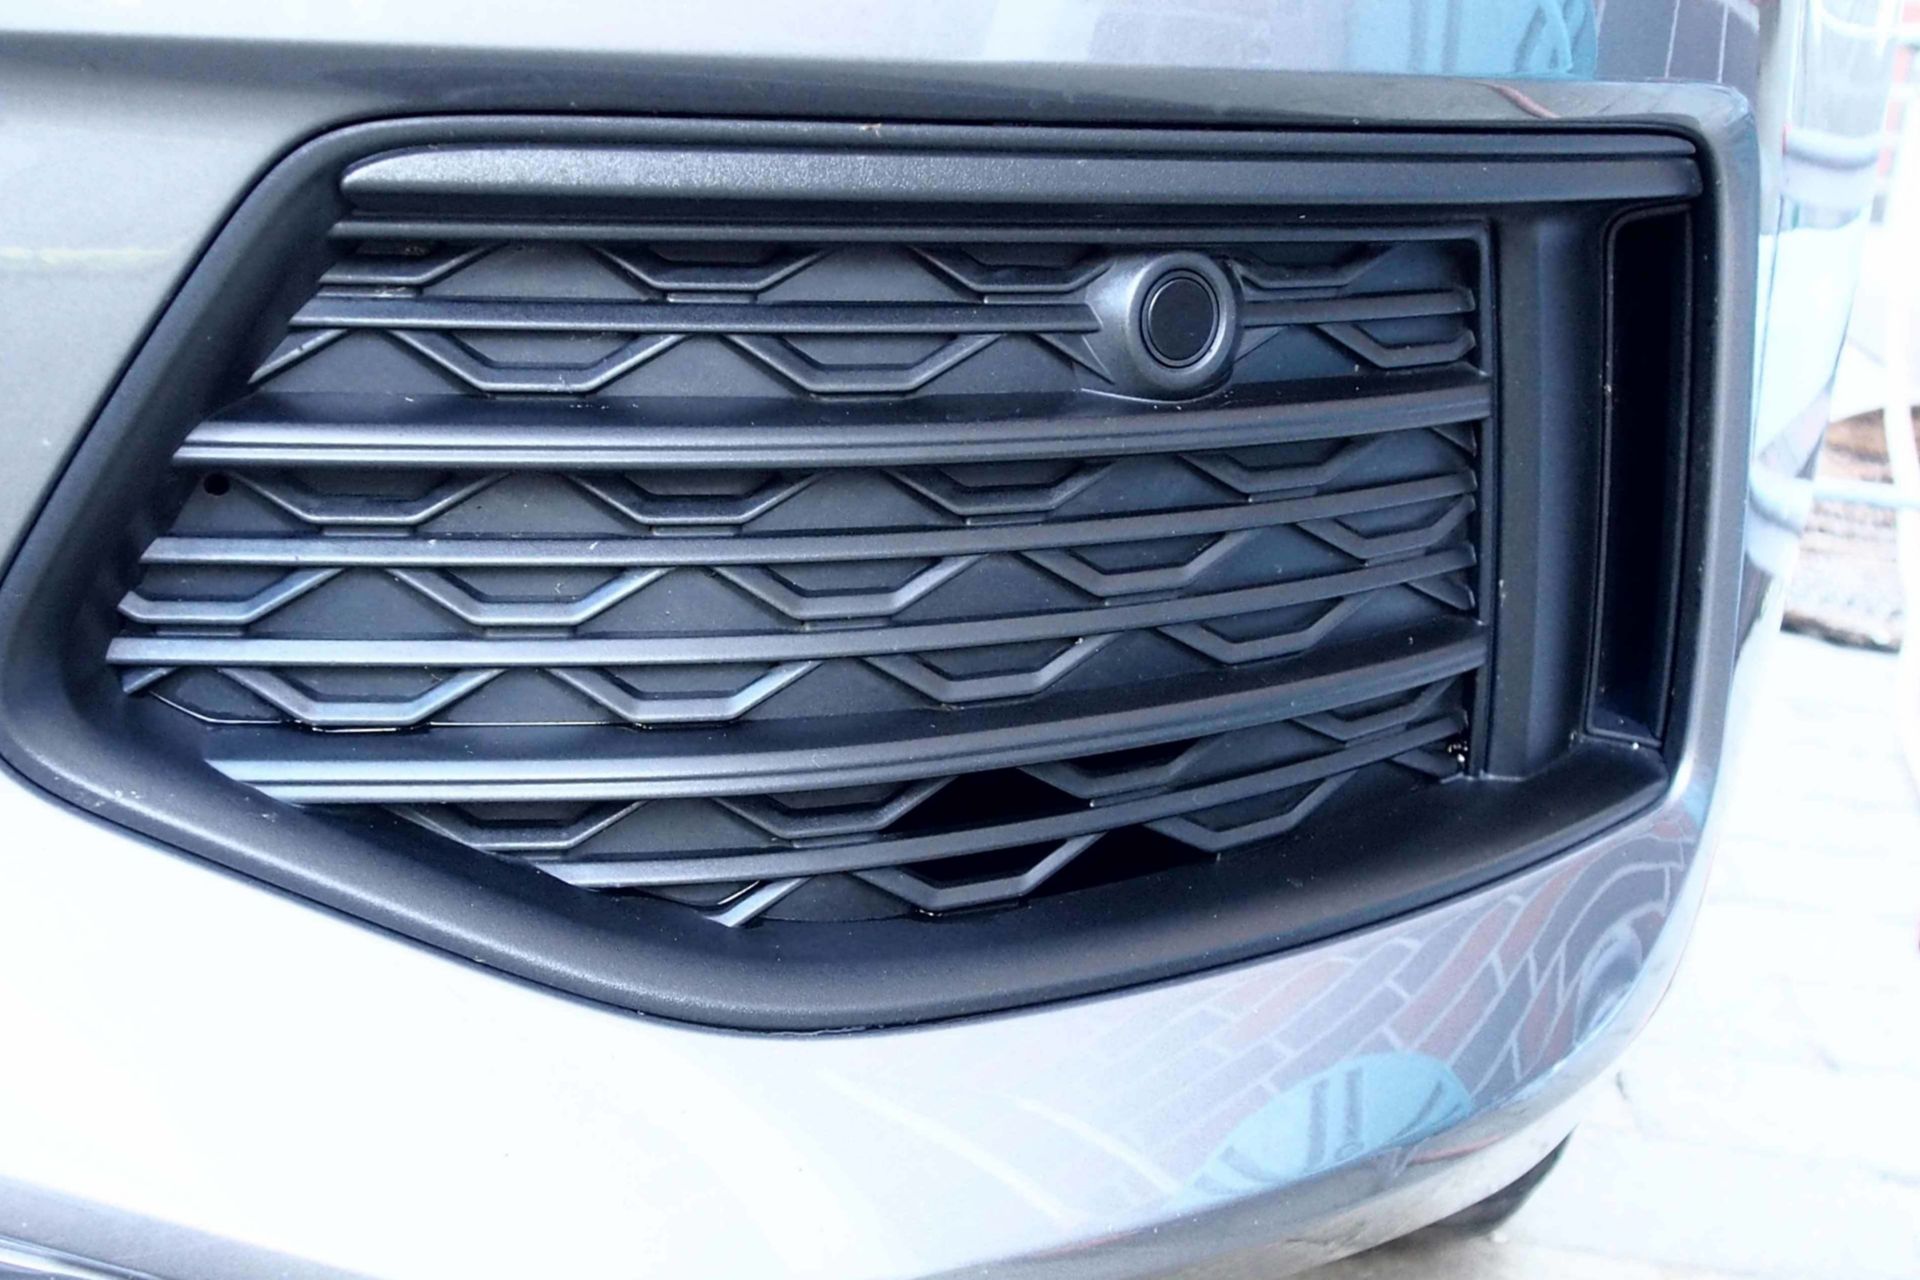 View of vehicle grill bonded with Sika Assembly Adhesive Solutions